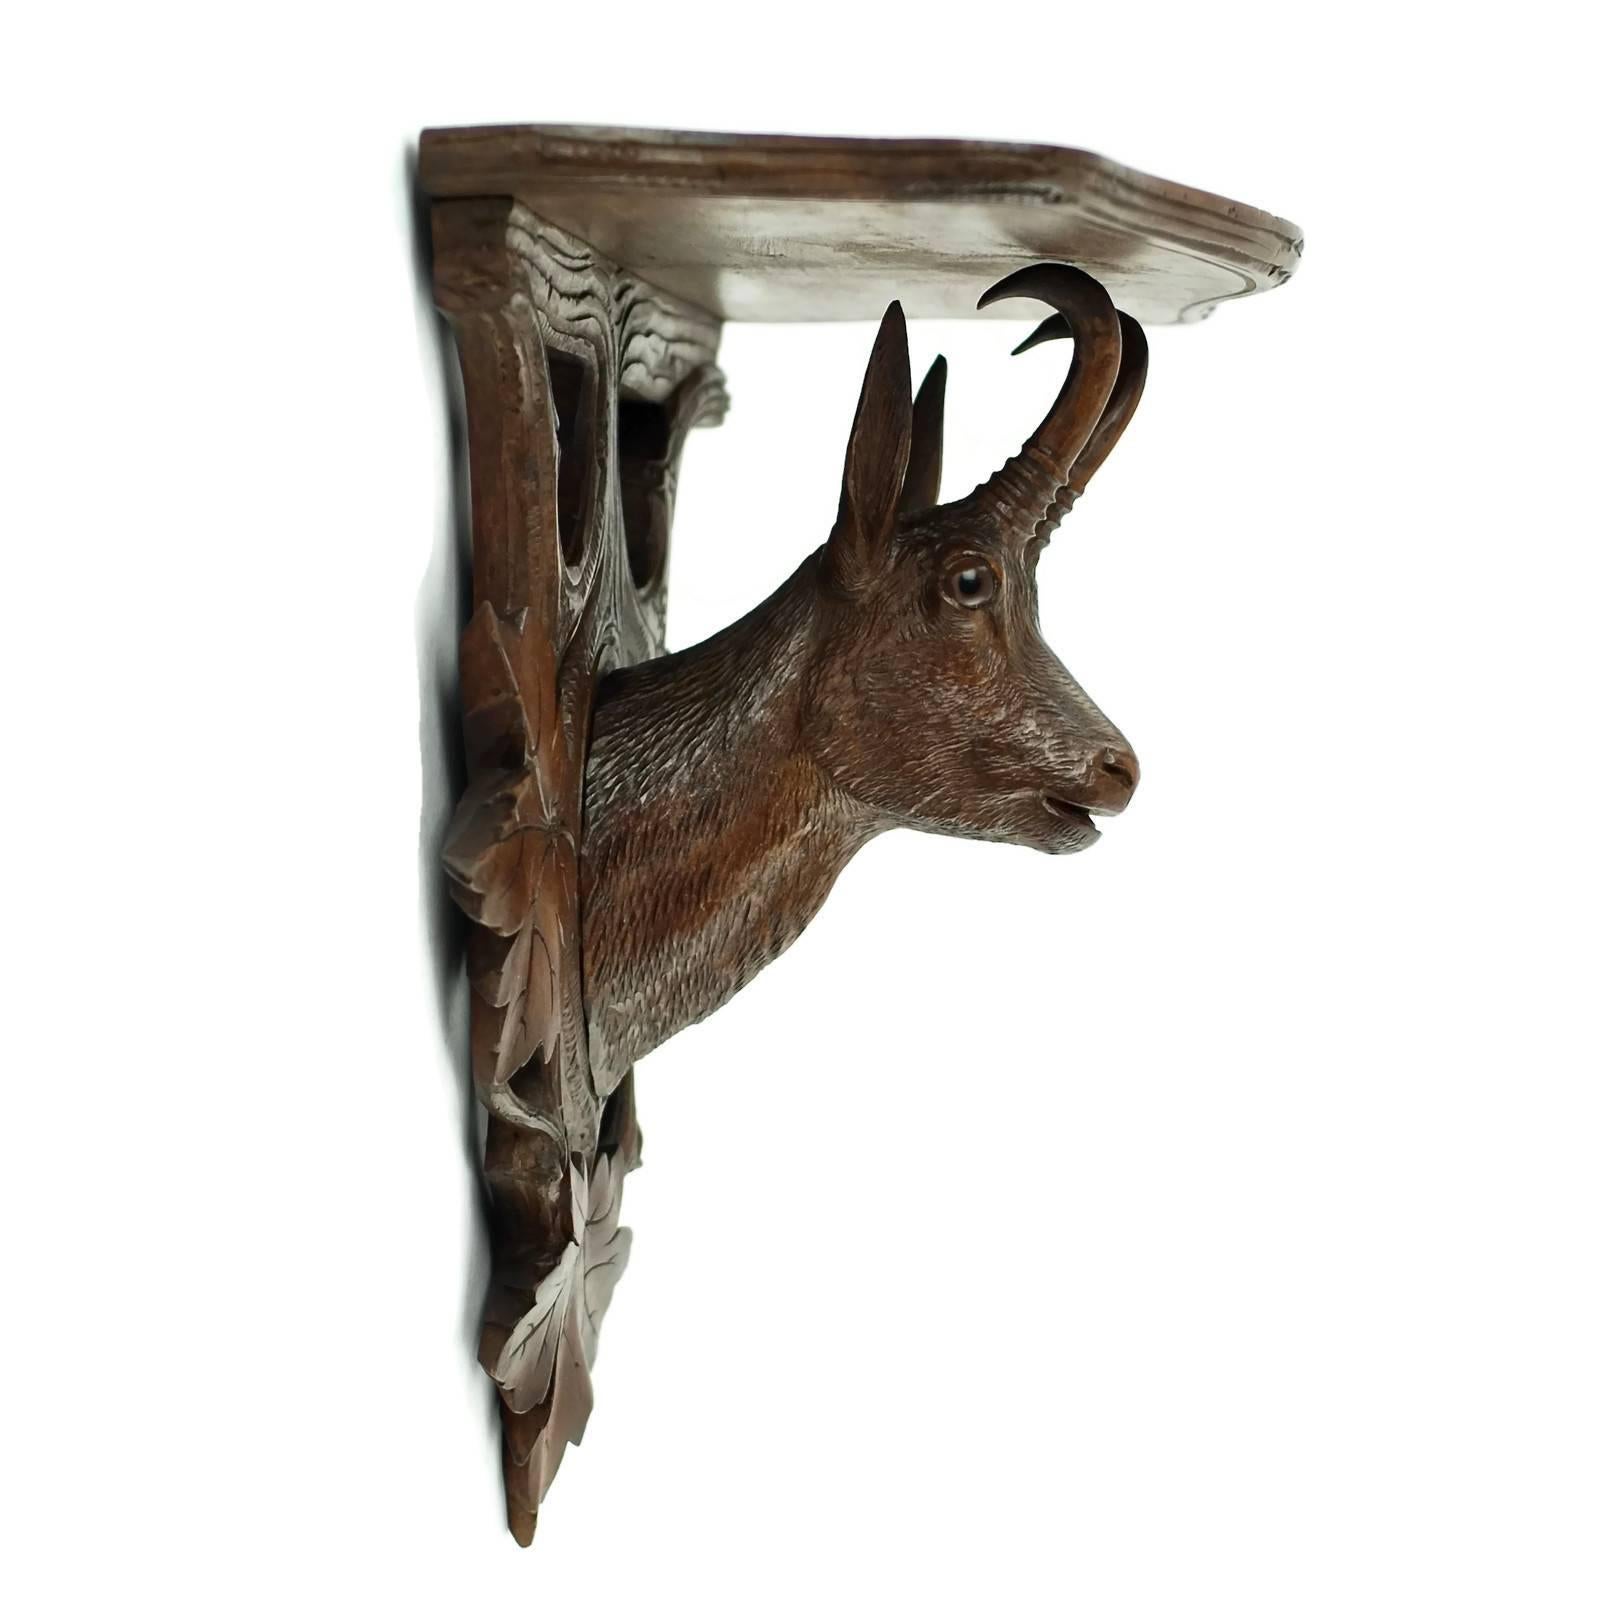 This beautifully carved late 19th century Black Forest wall shelf features a highly detailed dimensional chamois head with curved horns and polished glass eyes. The chamois head is mounted on a plaque and is located at the center of a grouping of